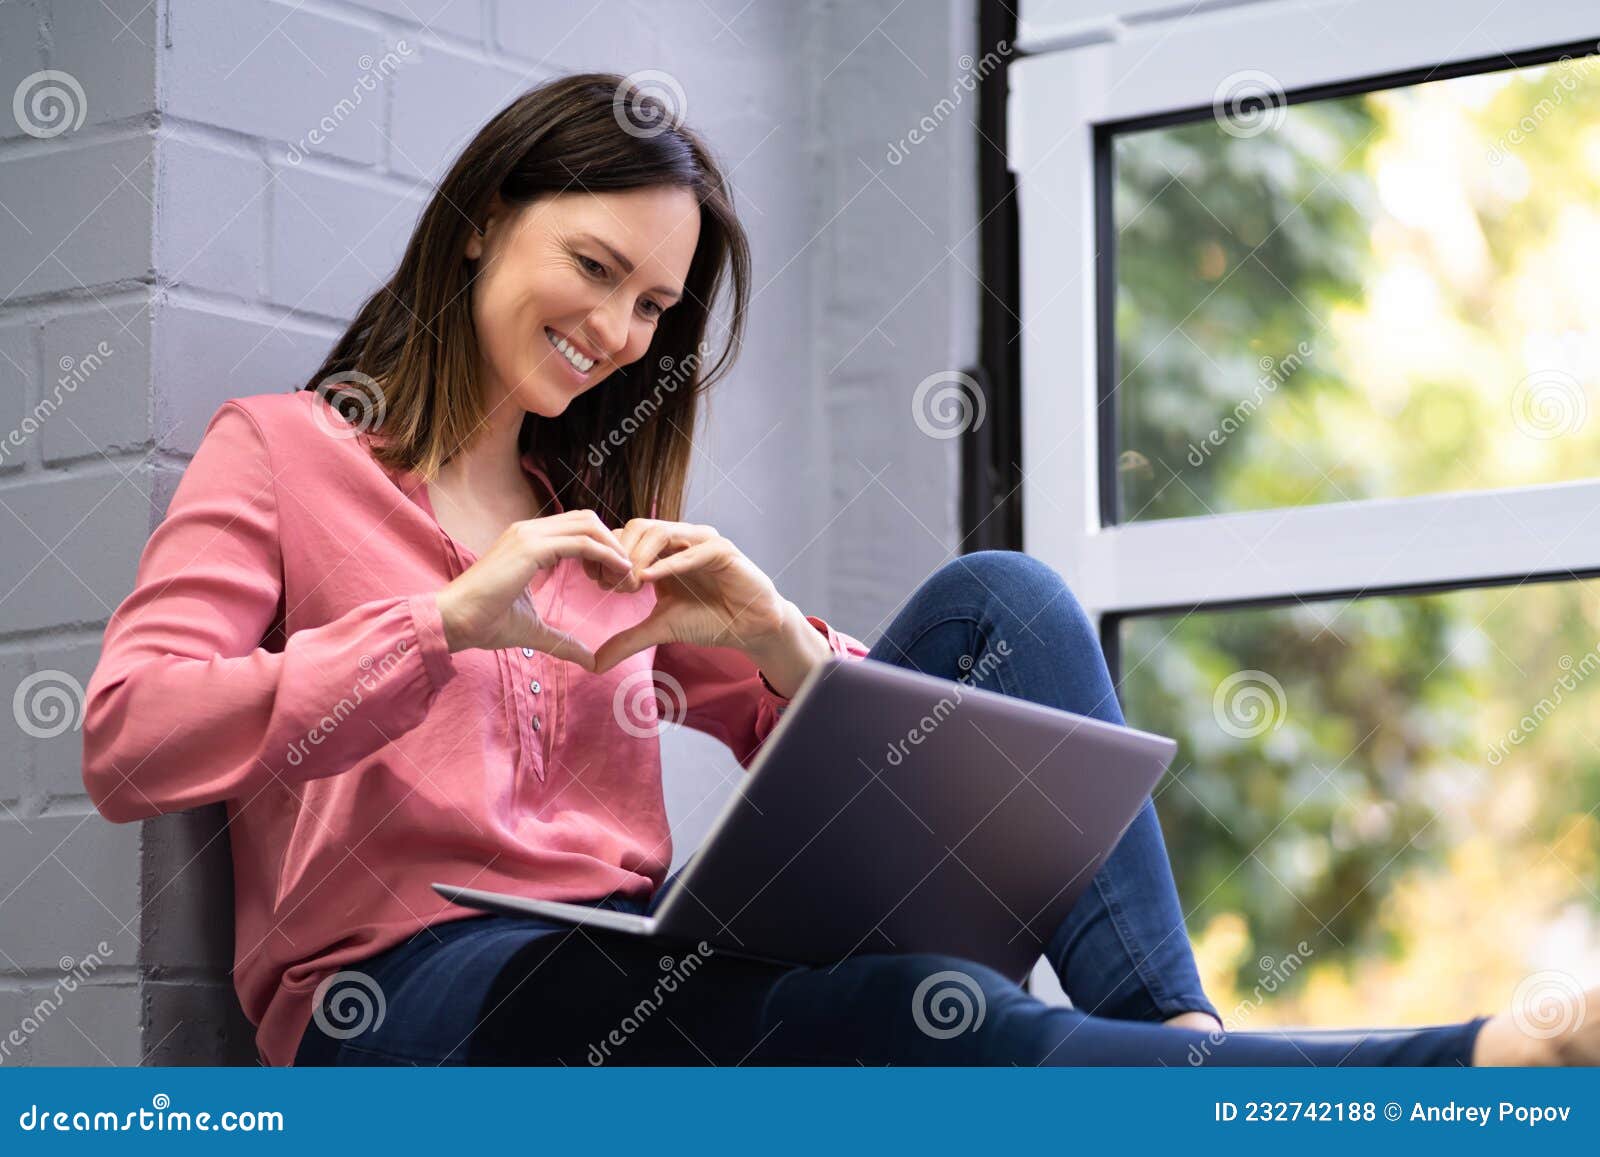 Online Dating Conference